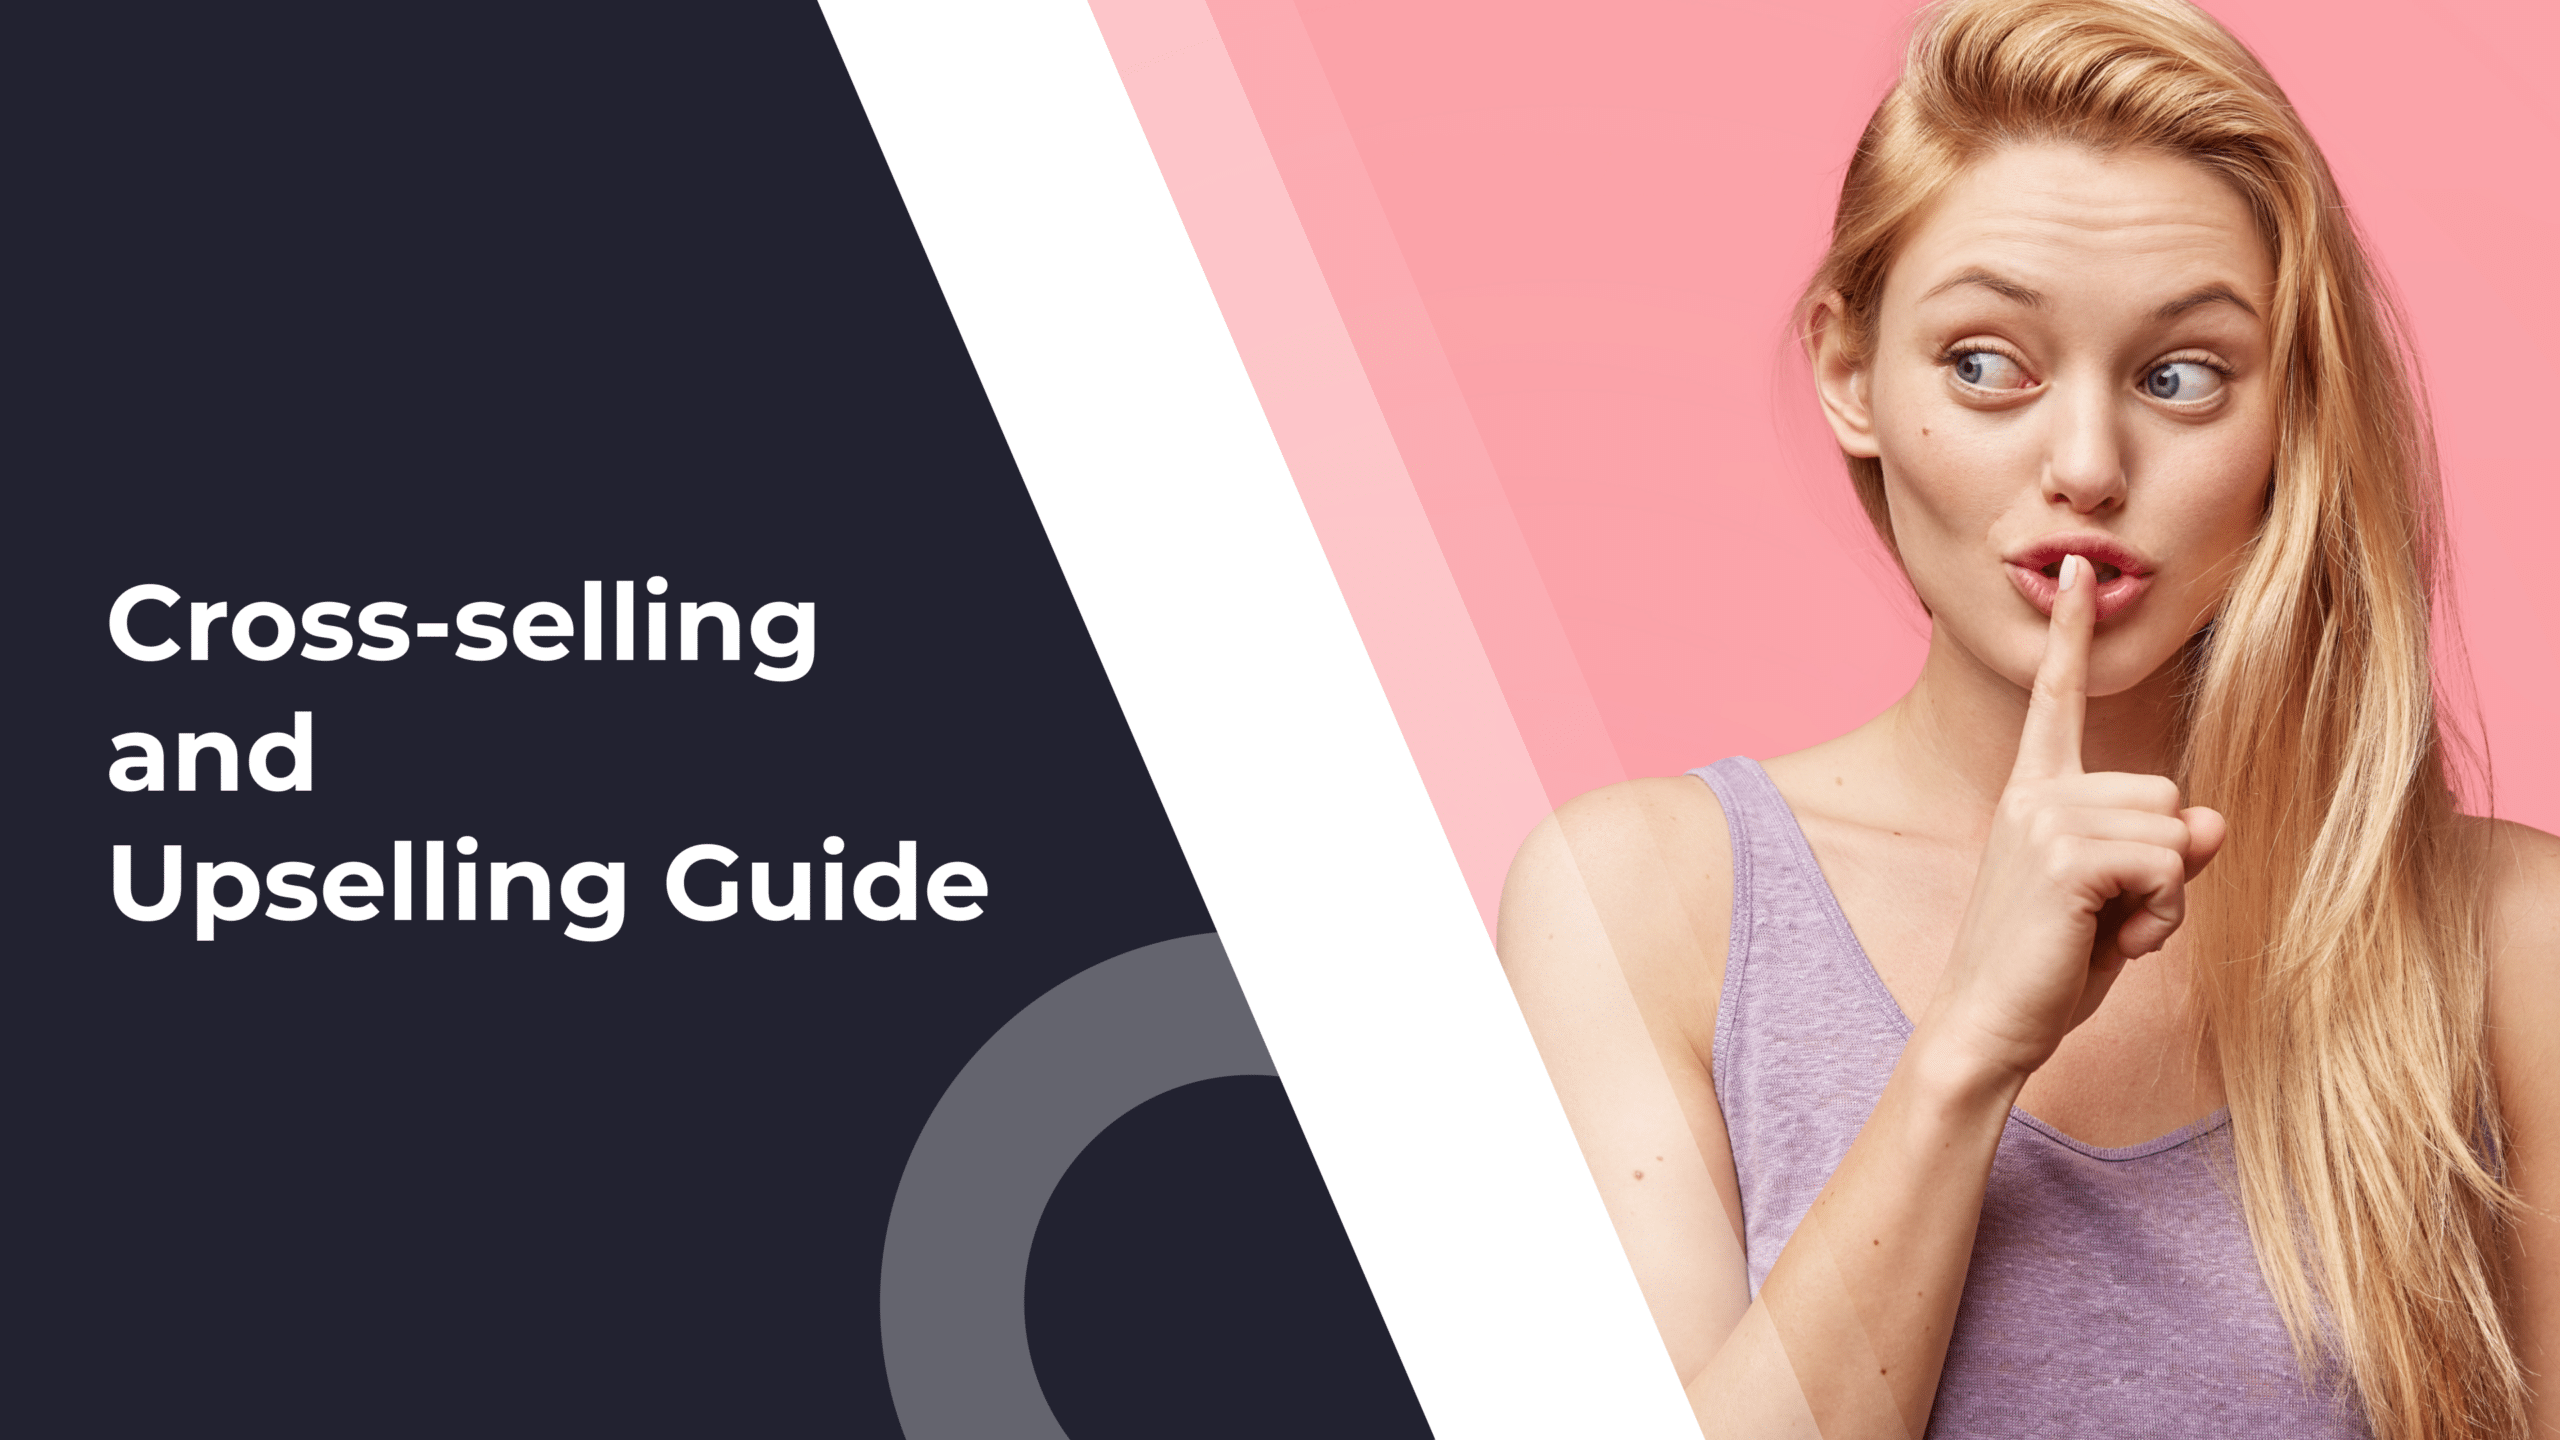 Cross-selling and upselling – the ultimate guide for SaaS